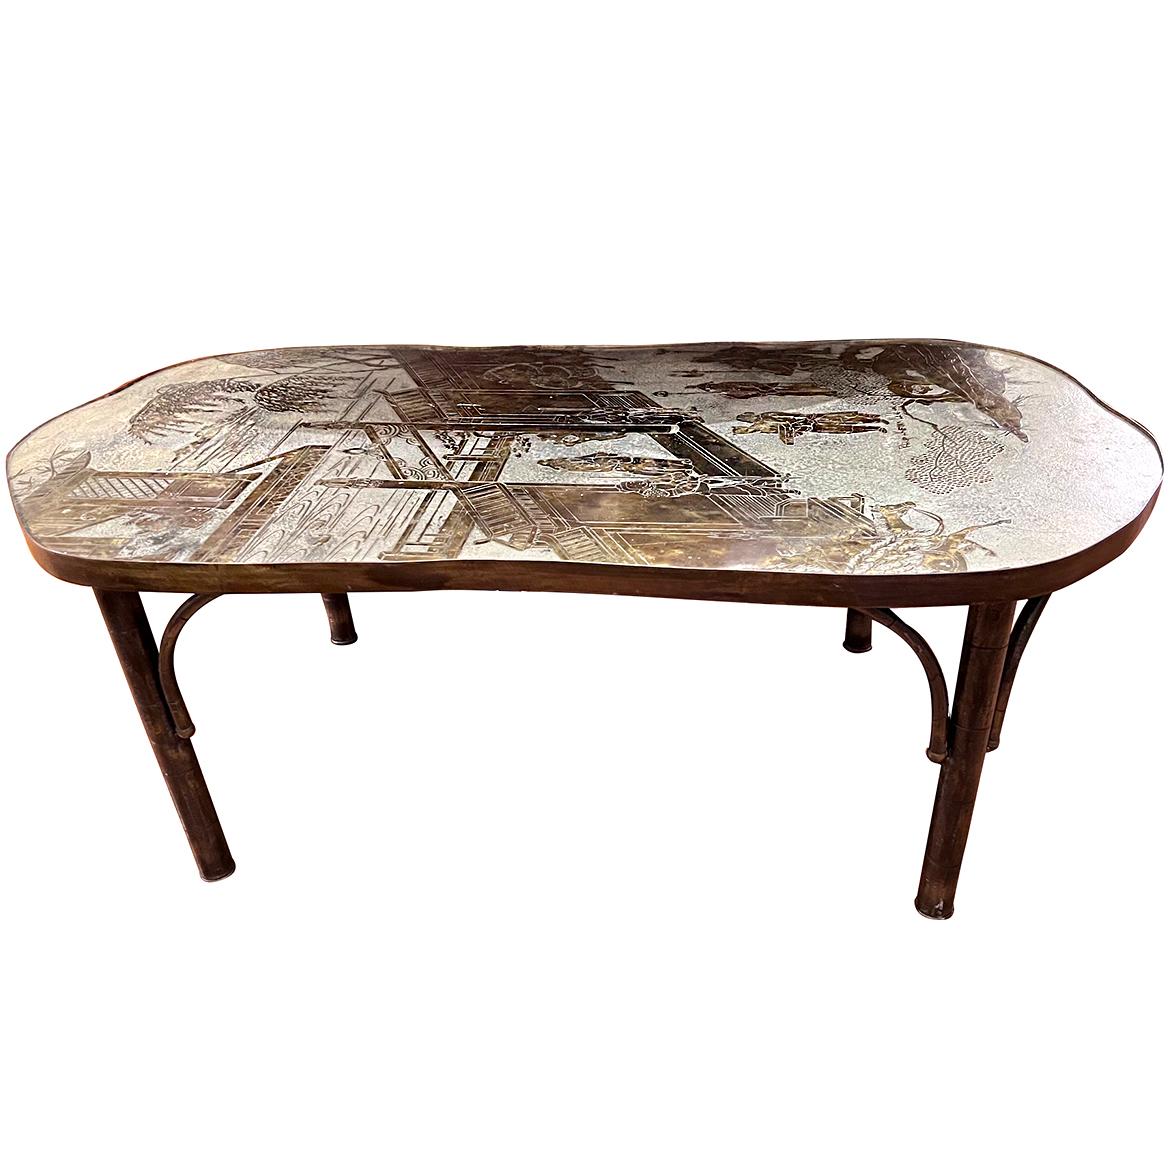 A circa 1960's patinated bronze and silvered table with original patina.

Measurements:
Height: 17